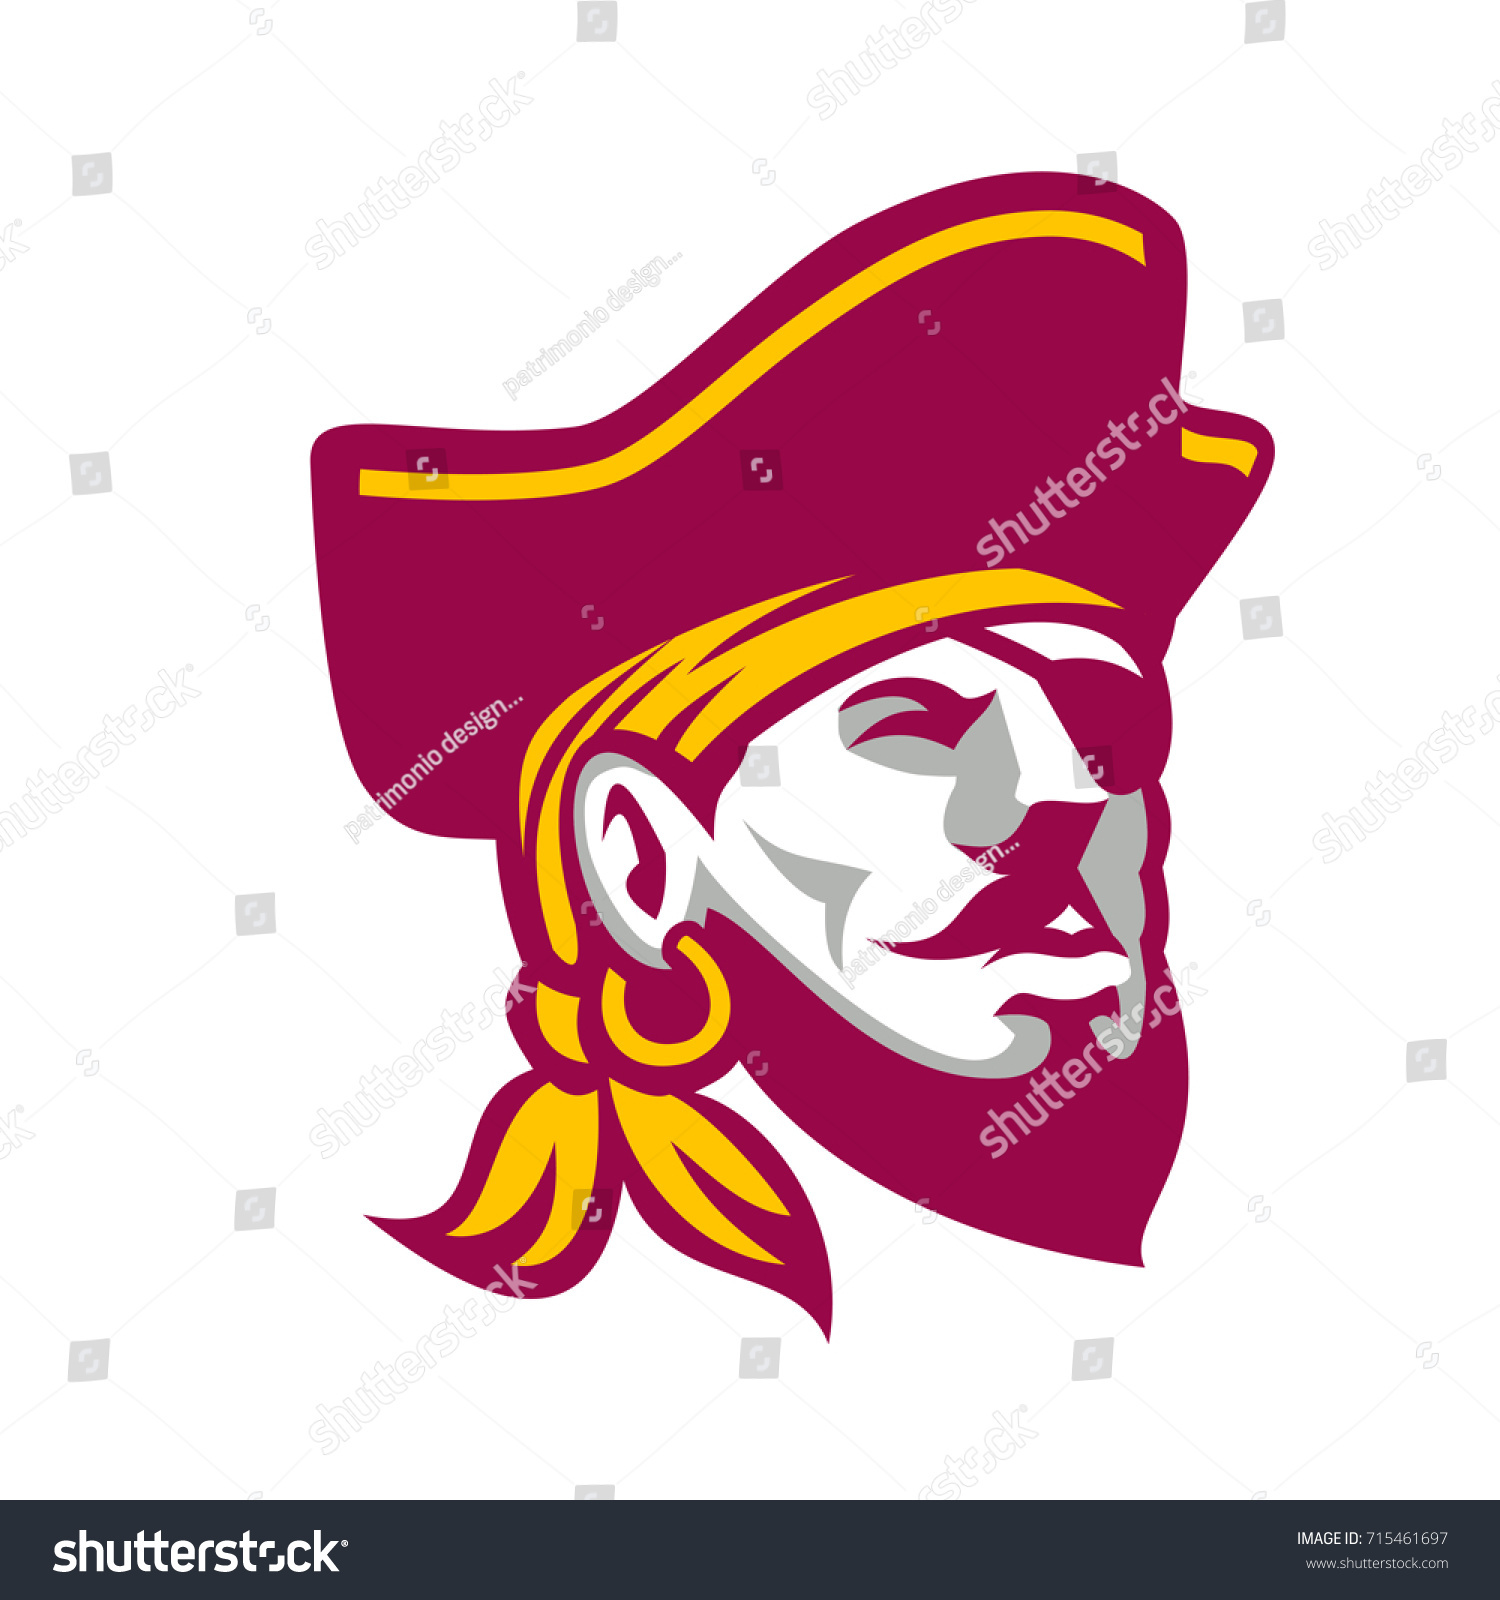 SVG of Icon style illustration of a Buccaneer, a privateer or pirate particular to the Caribbean Sea wearing tricorne hat on isolated background. svg